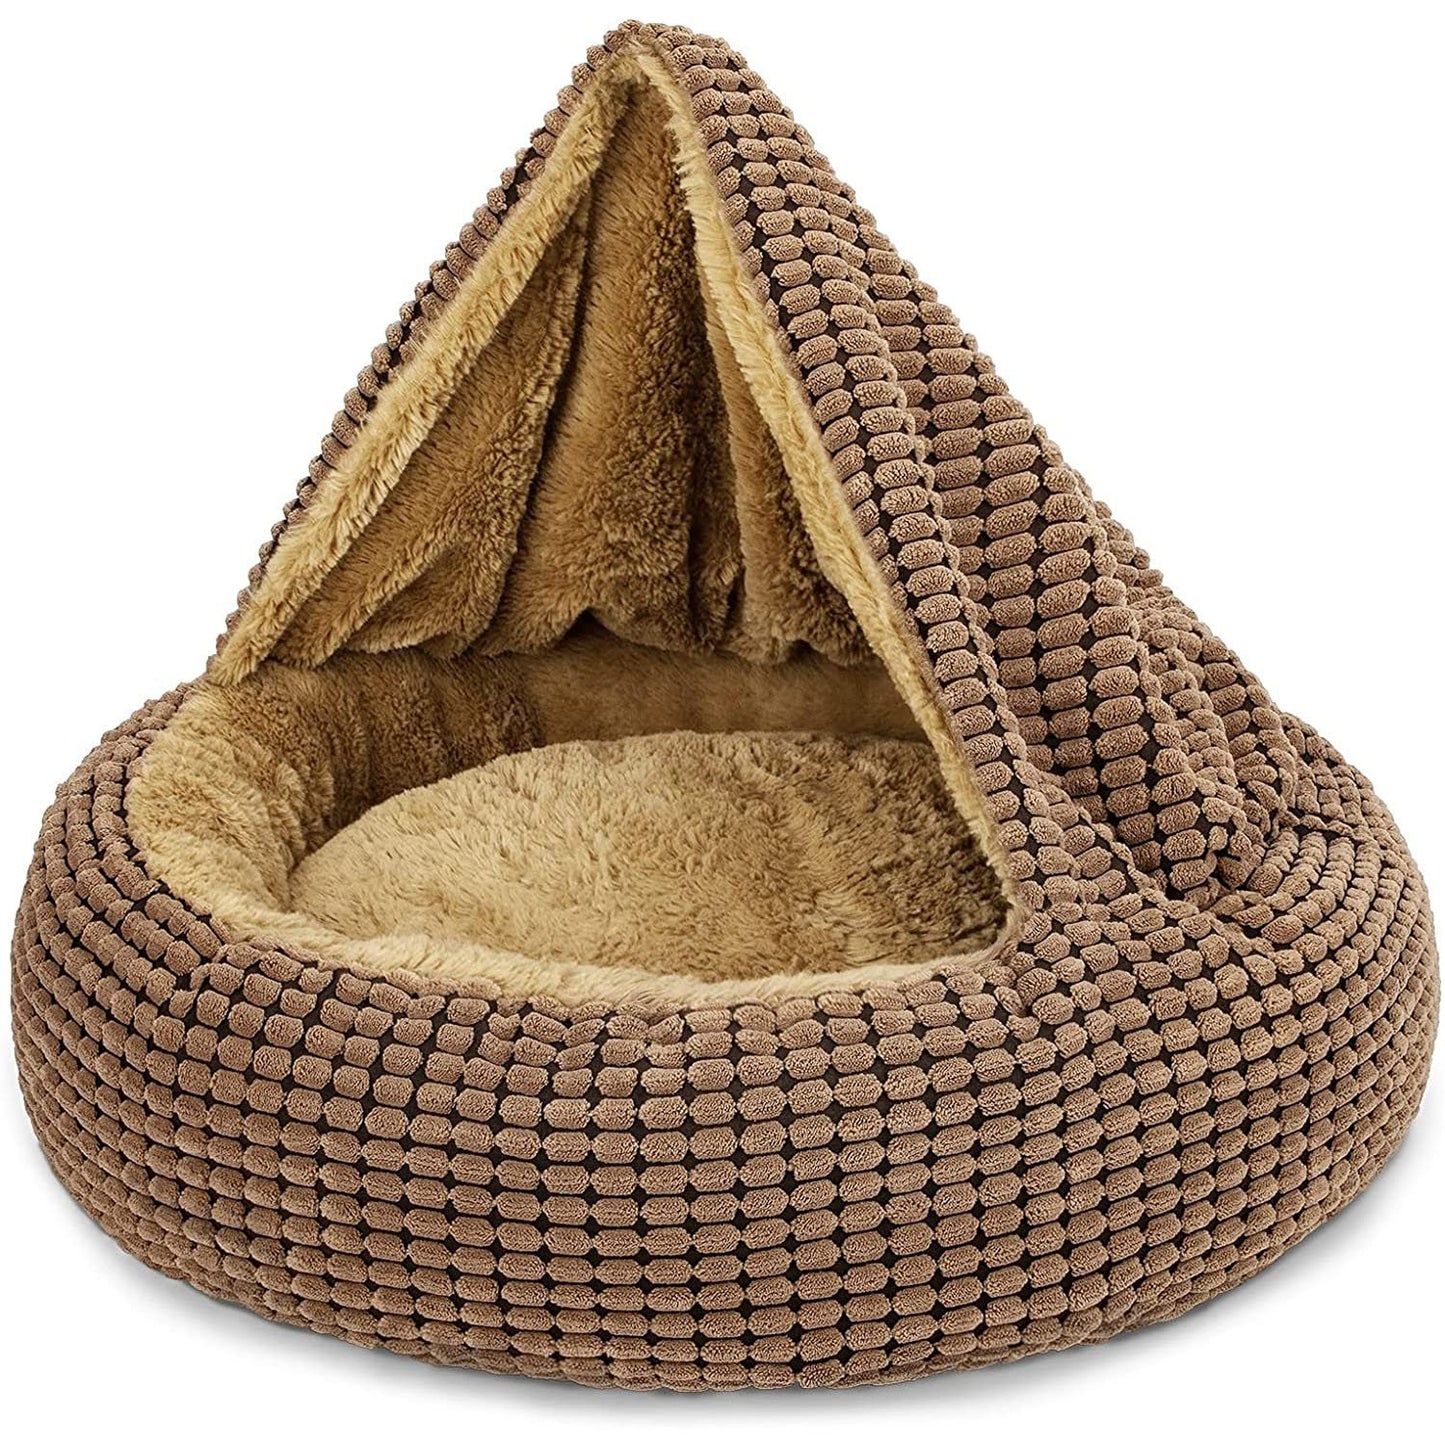 Donuts Pet dog cat nesting Cozy Cave bed Deep Sleepping winter keep warm